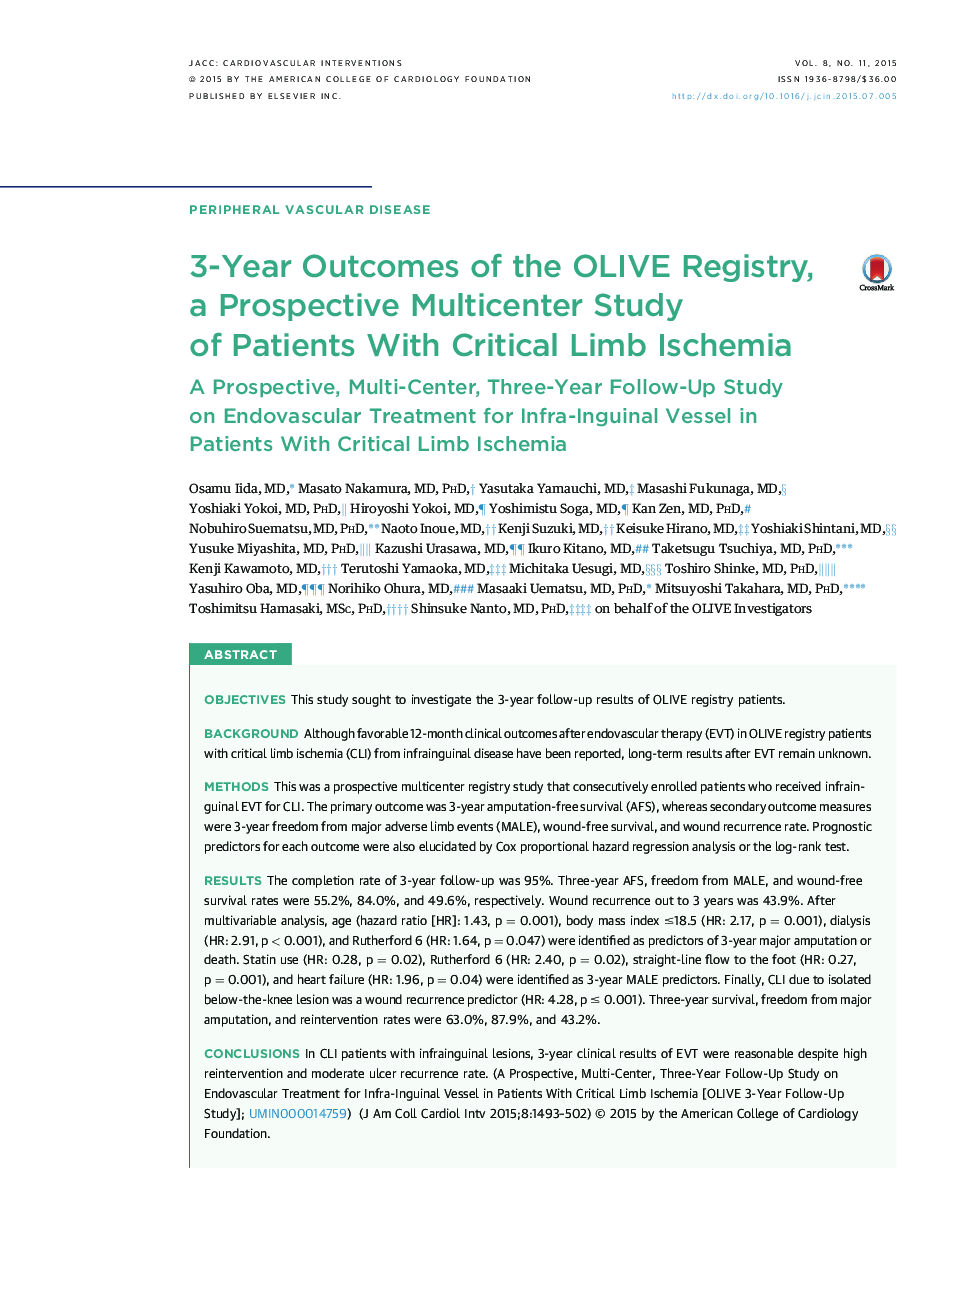 3-Year Outcomes of the OLIVE Registry, a Prospective Multicenter Study of Patients With Critical Limb Ischemia : A Prospective, Multi-Center, Three-Year Follow-Up Study on Endovascular Treatment for Infra-Inguinal Vessel in Patients With Critical Limb Isc